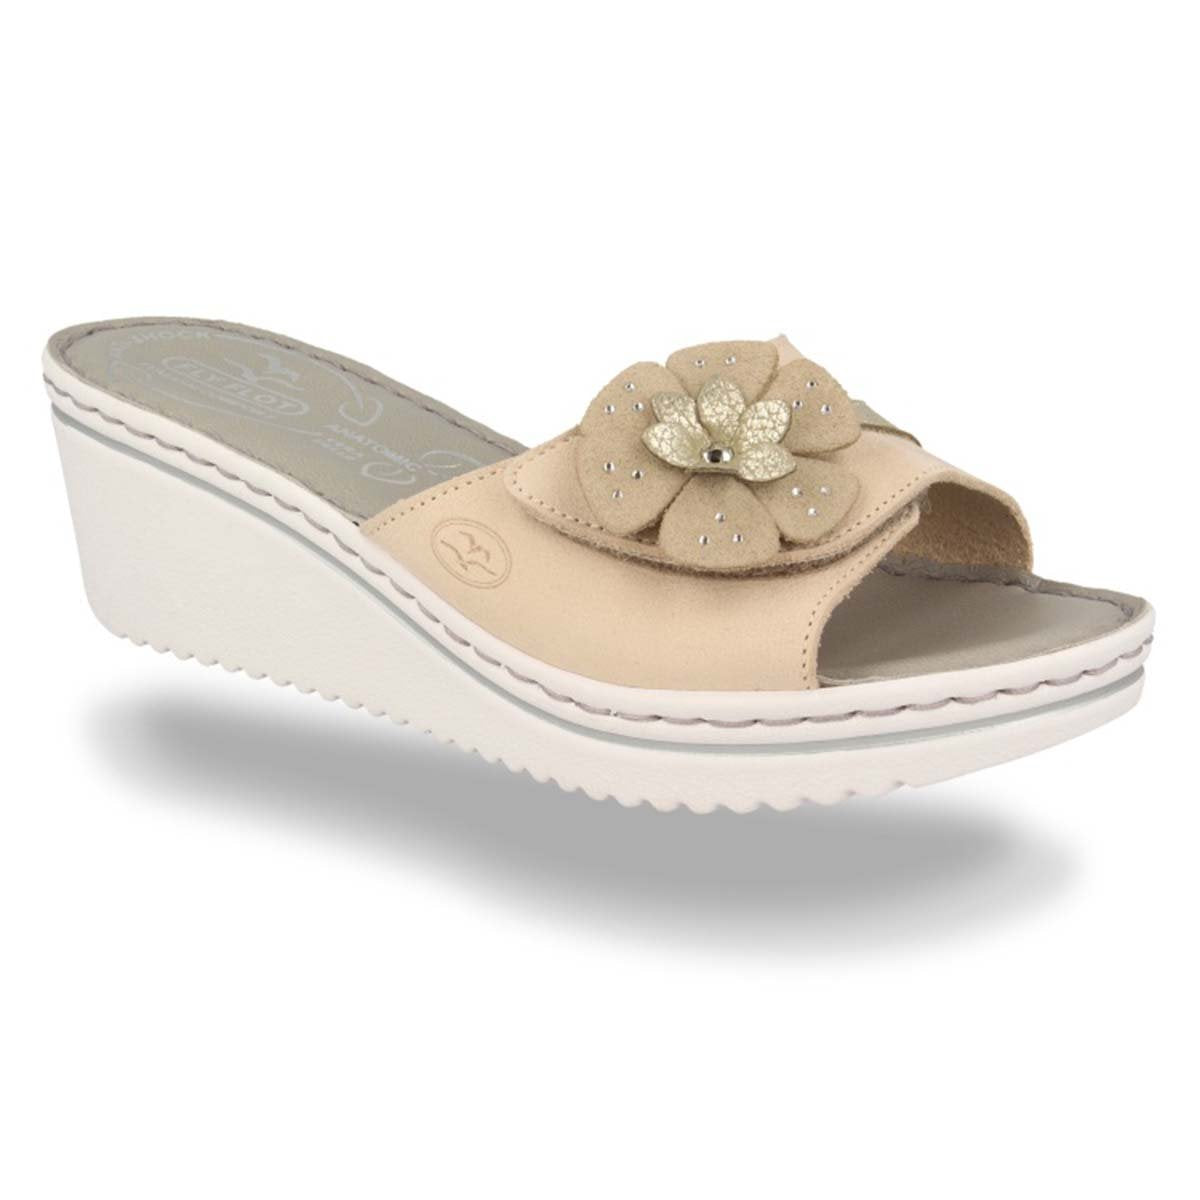 See photos Leather Woman Slipper Beige (41D433G)